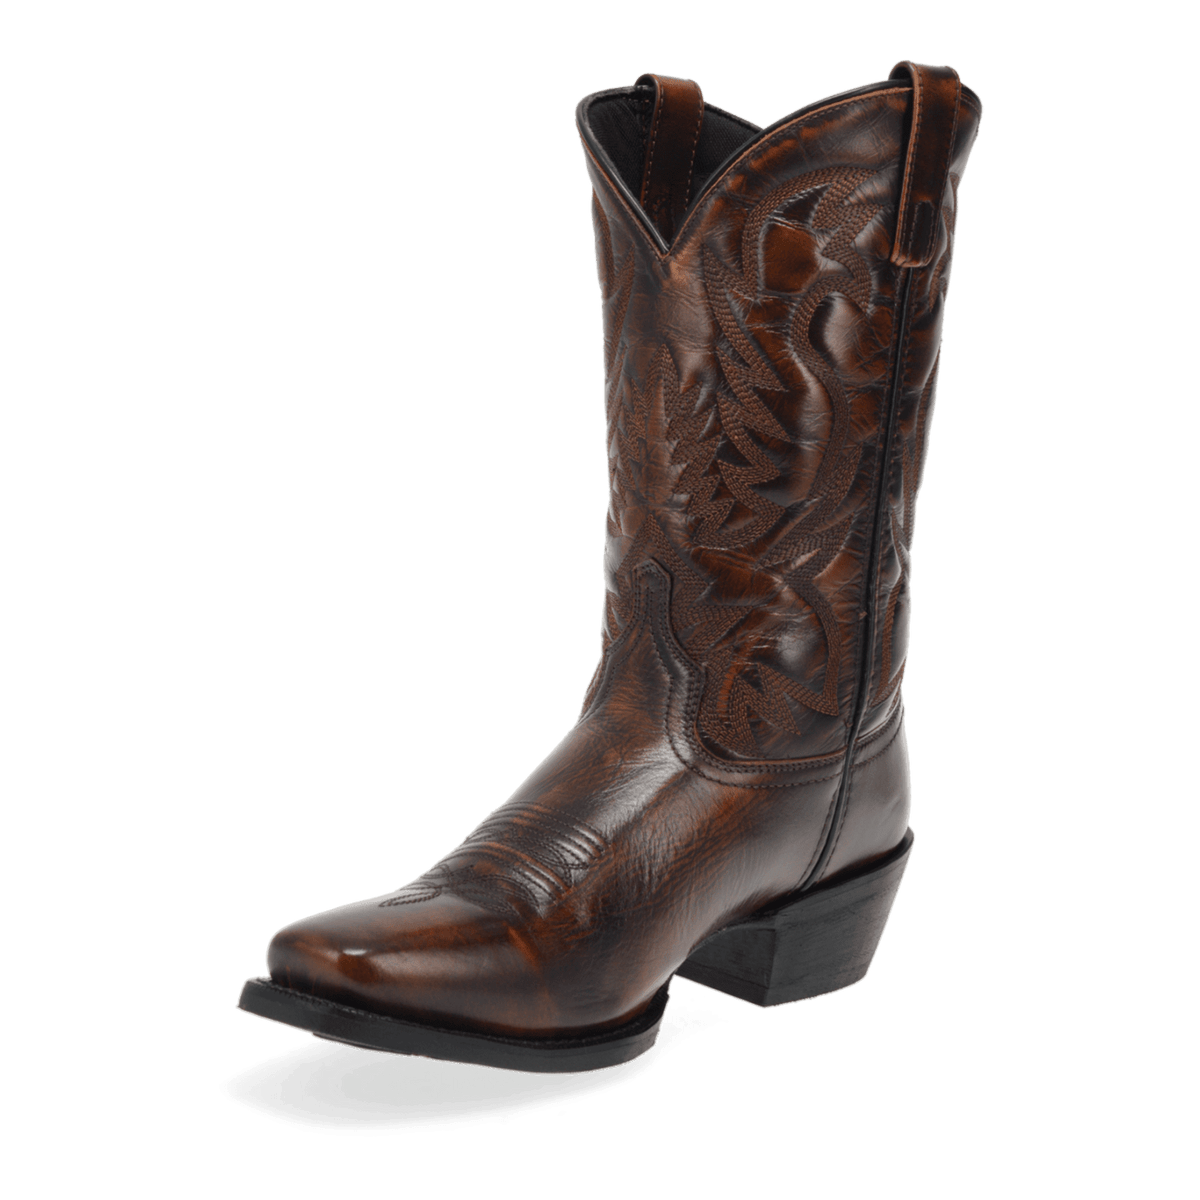 LAWTON LEATHER BOOT Image